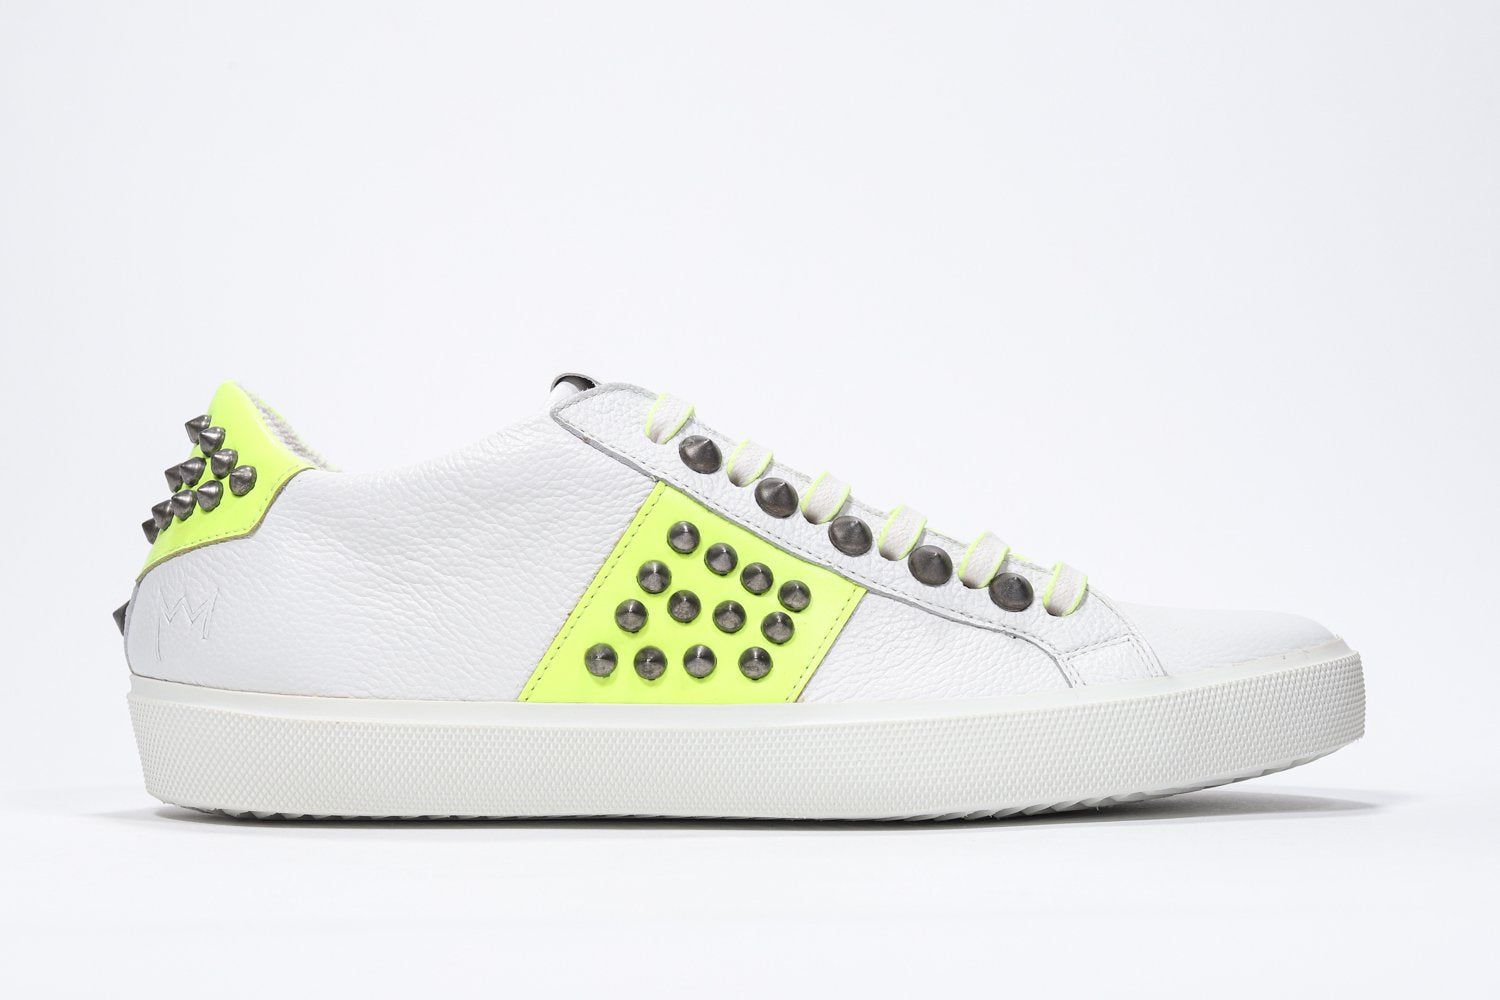 Side profile of low top white and neon yellow sneaker. Full leather upper with studs and white rubber sole.